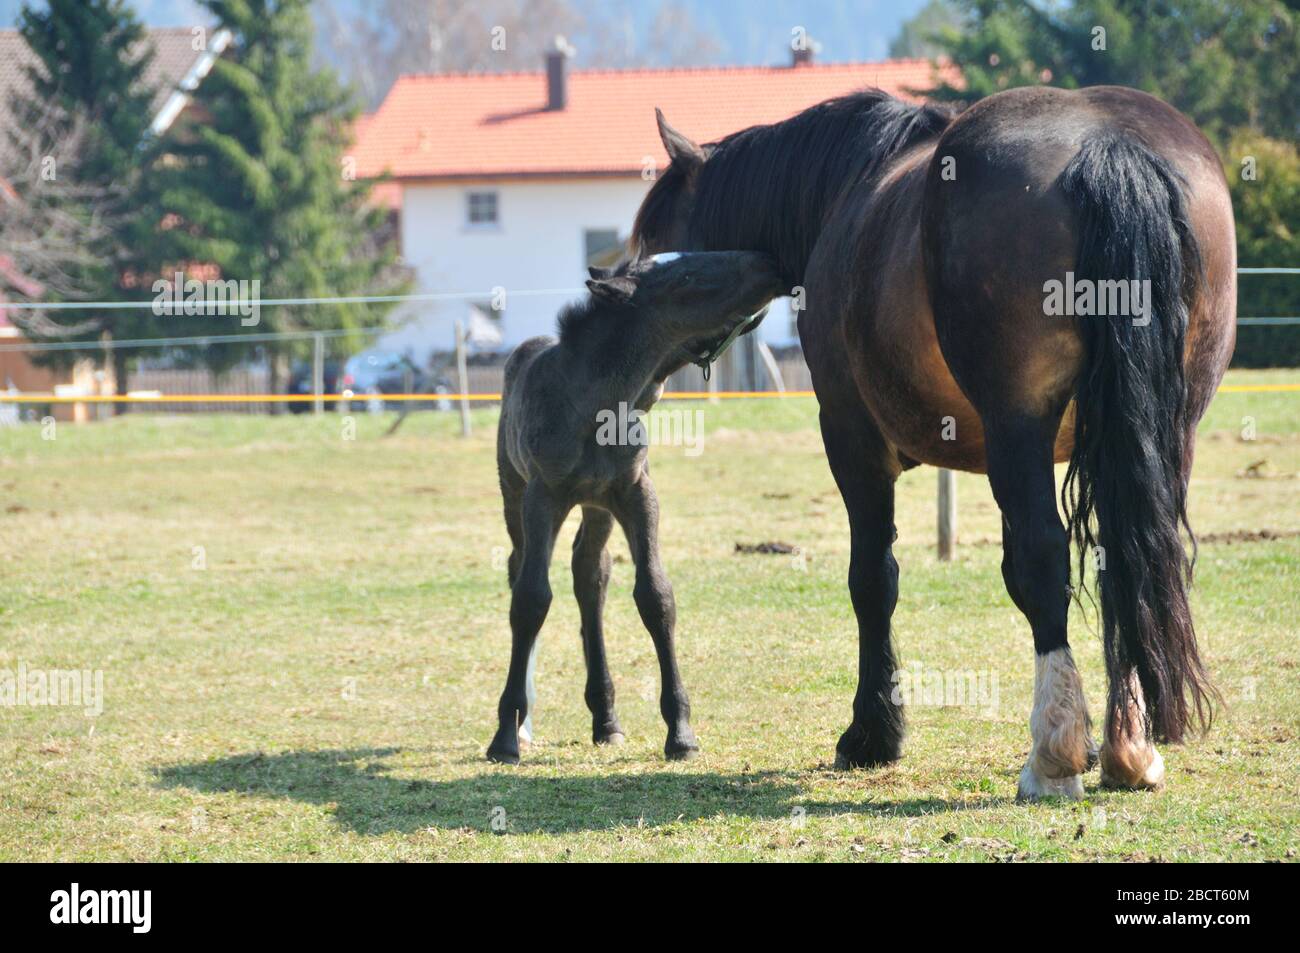 Horse with foal Stock Photo